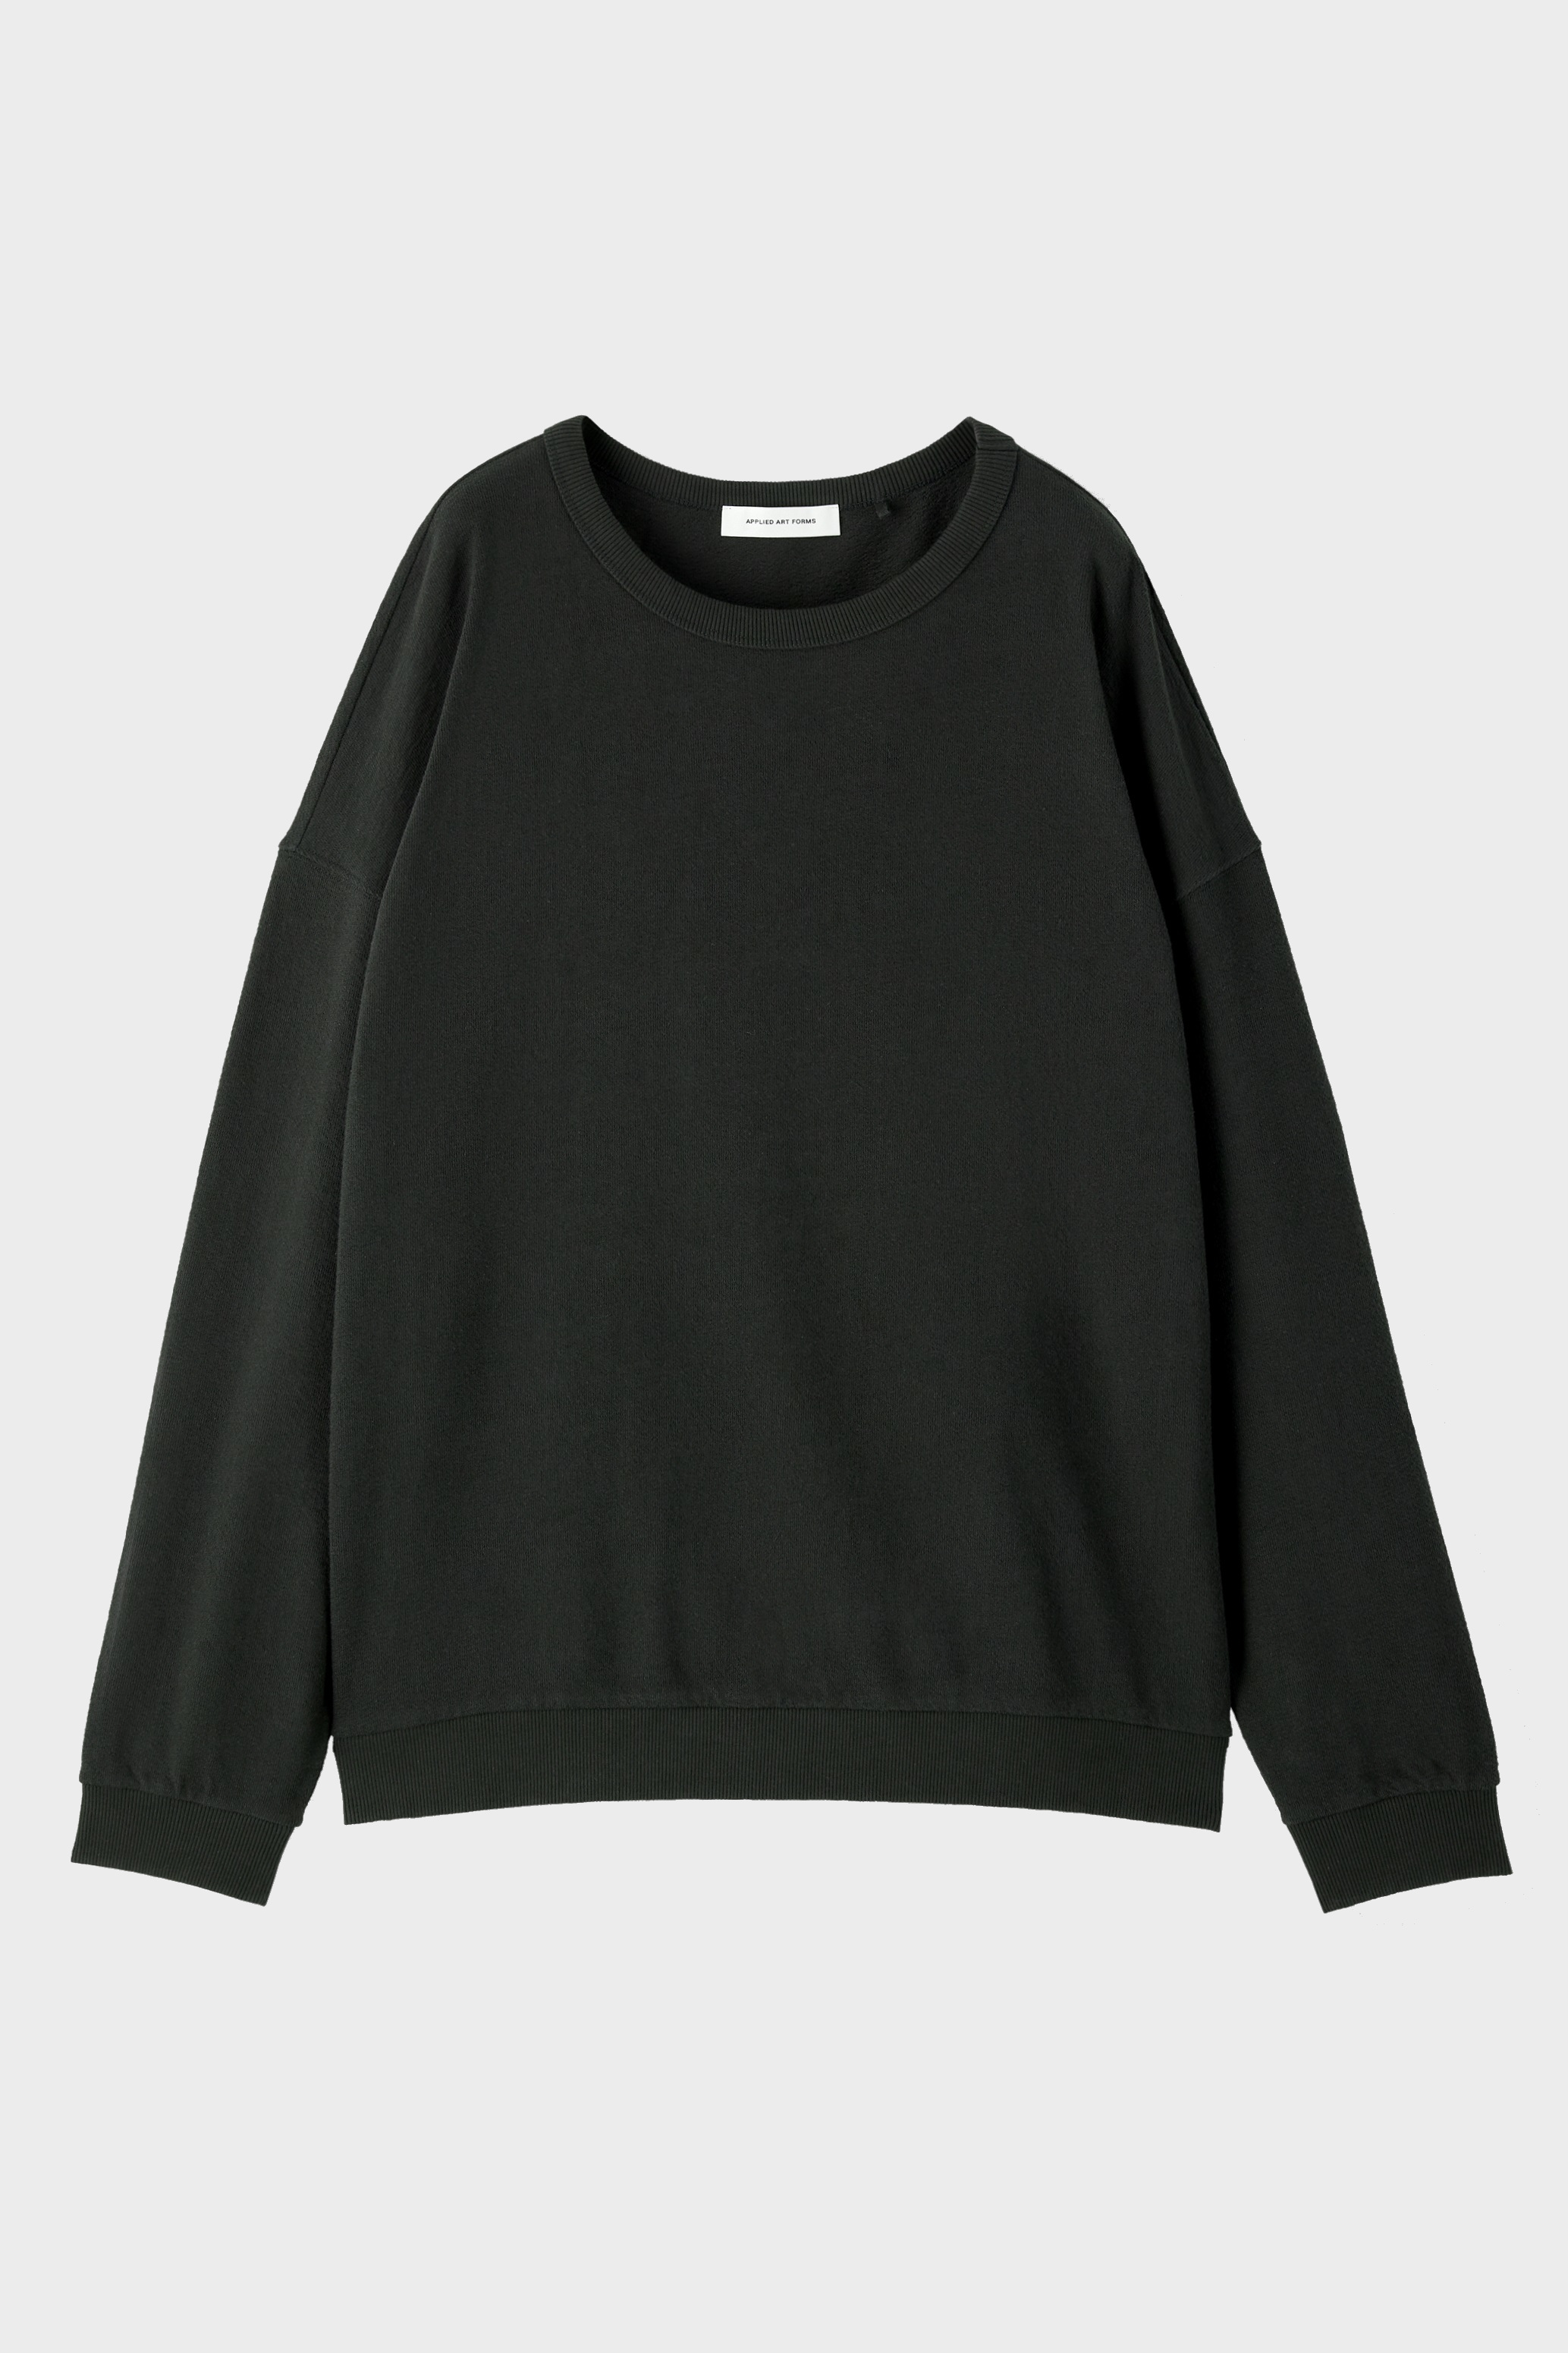 APPLIED ART FORMS Structured Sweater in Charcoal